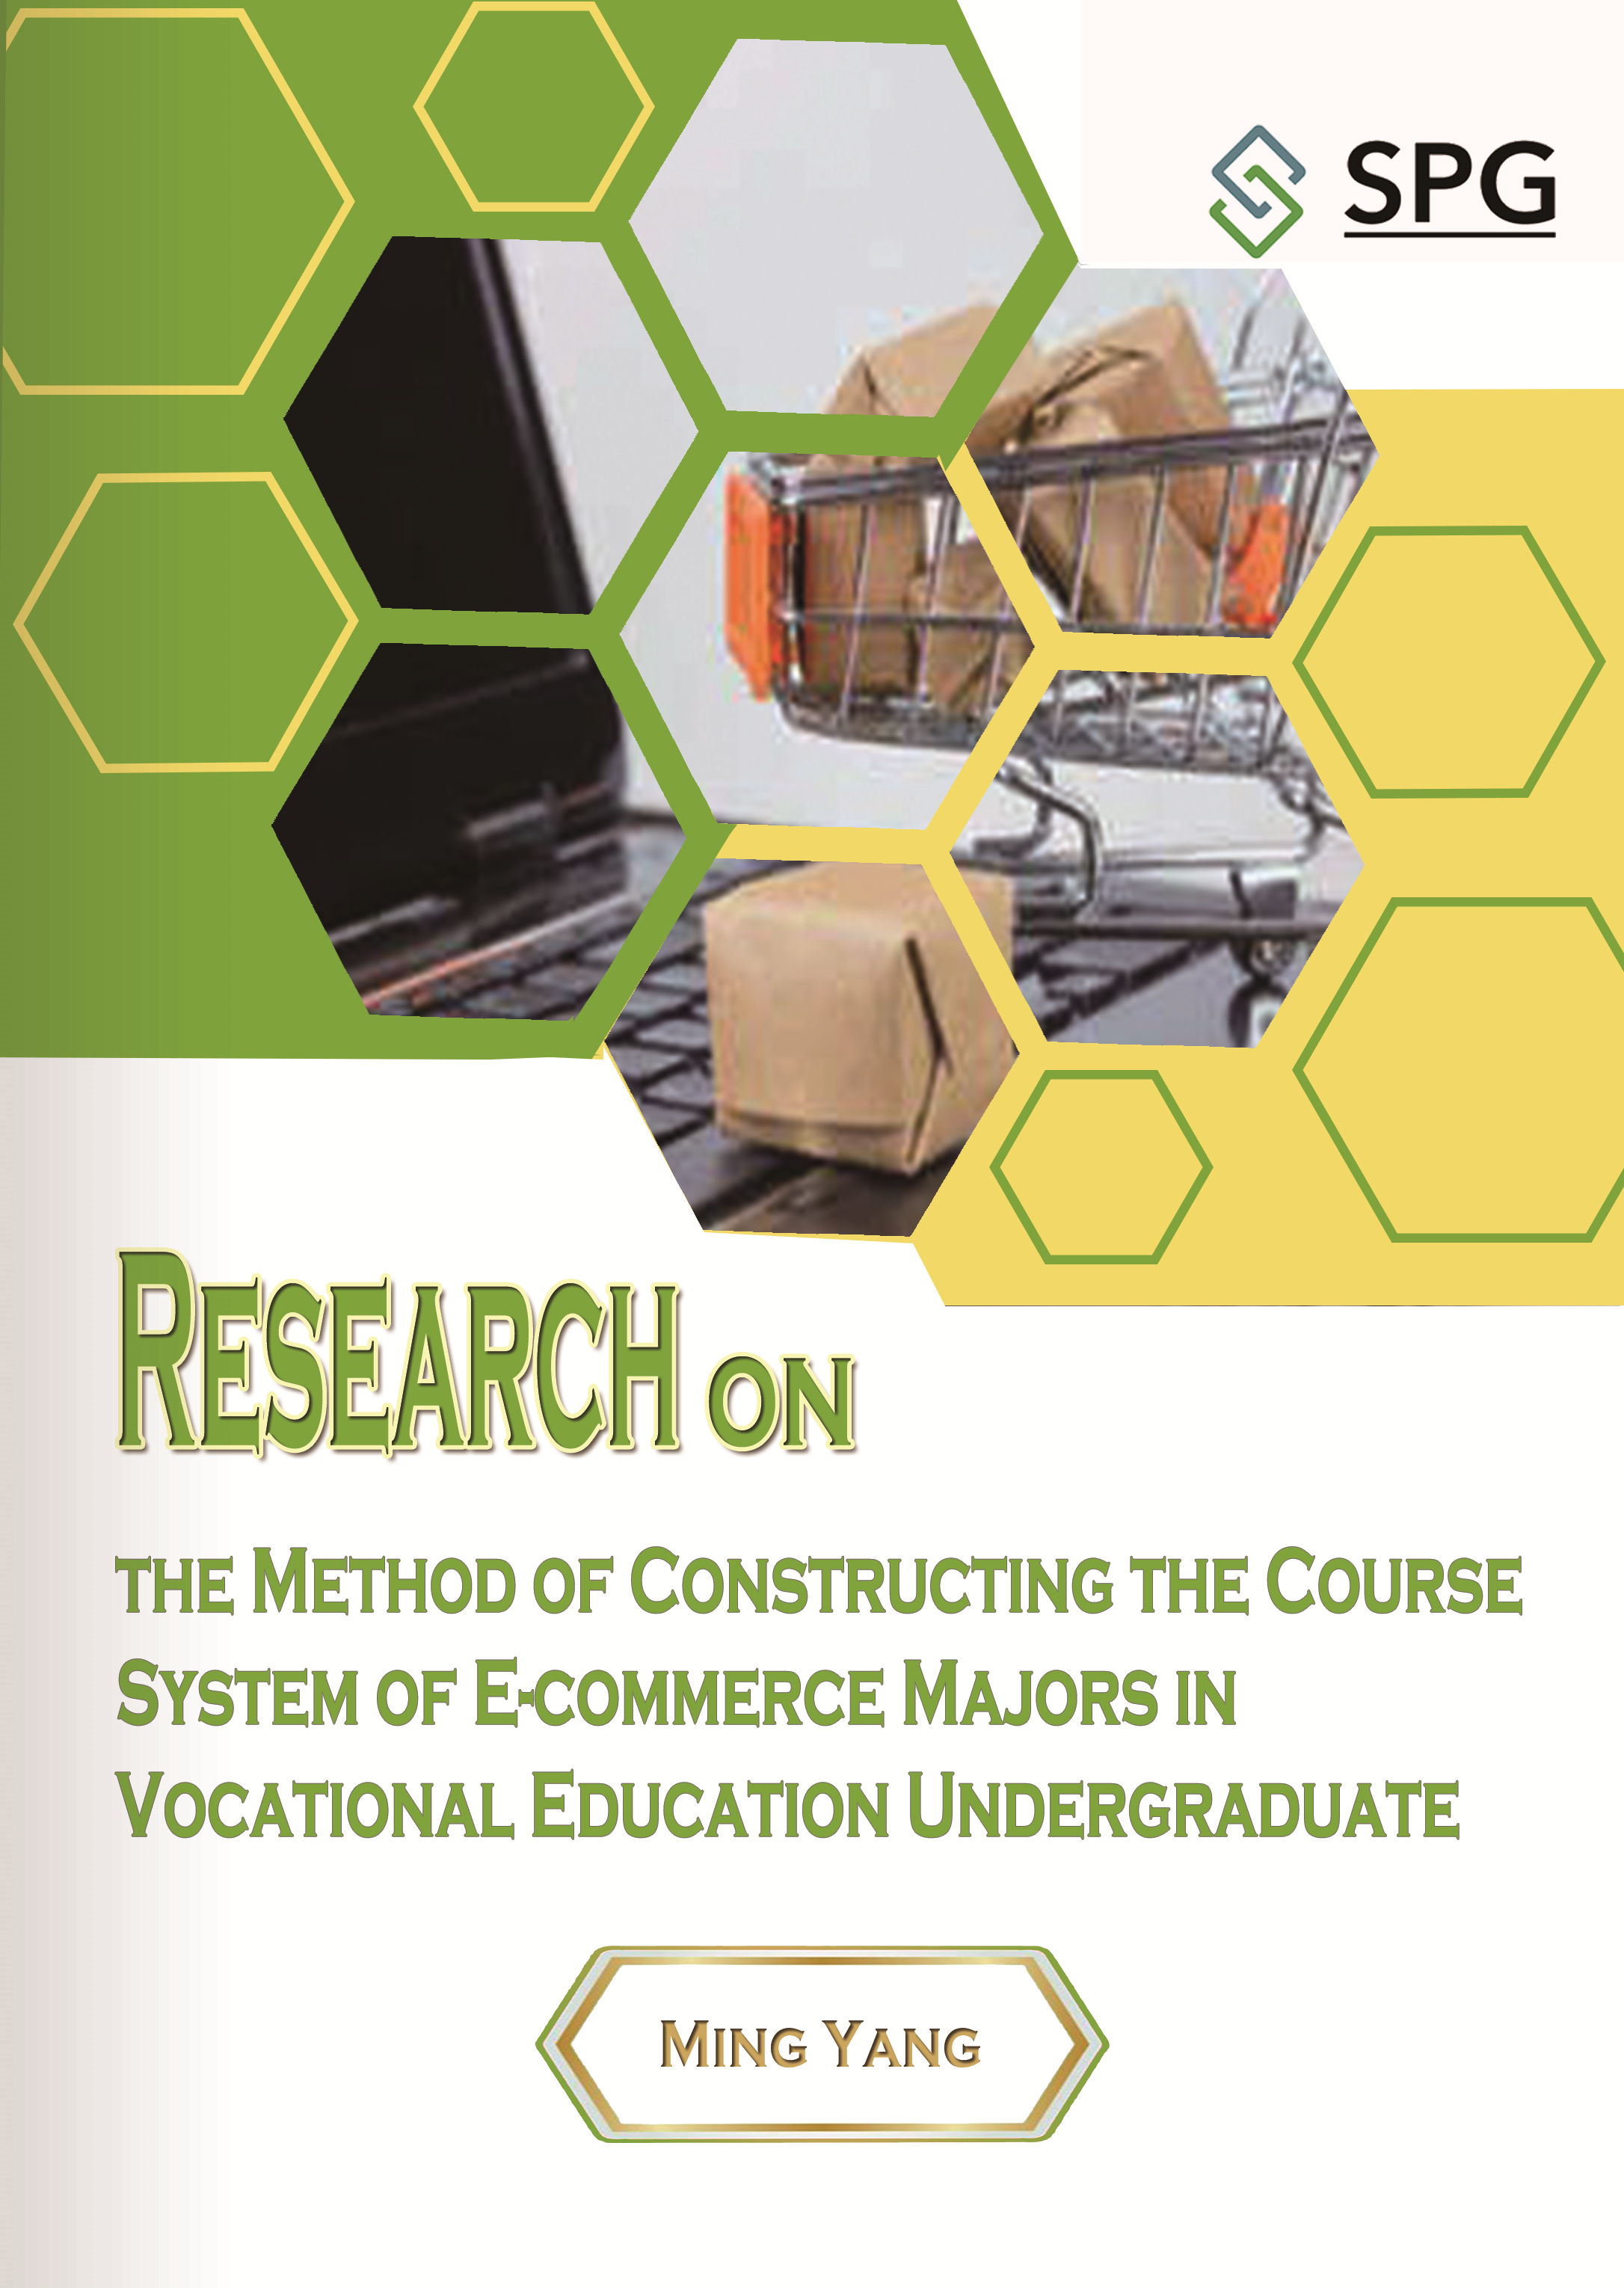 Research on the Method of Constructing the Course System of E-commerce Majors in Vocational Education Undergraduate | Scholar Publishing Group